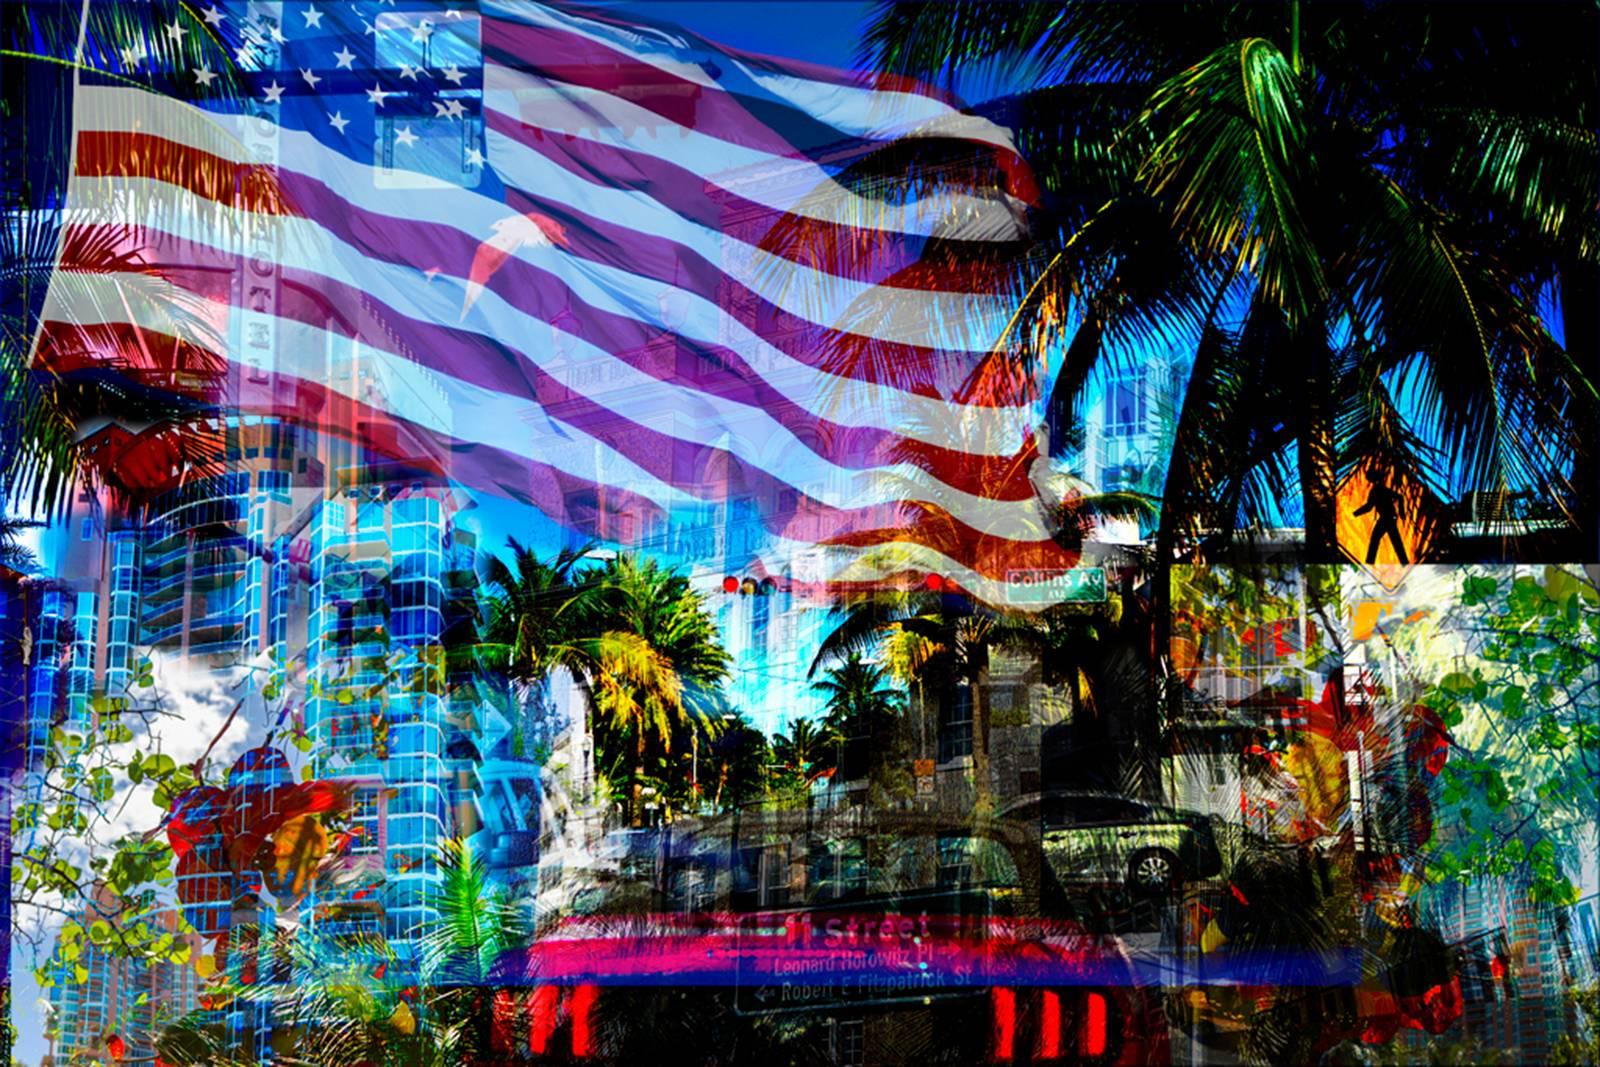 Jacques Beneich Color Photograph - MIAMI AMERICA - The US Flag as a Symbol of Freedom in beautiful Miami